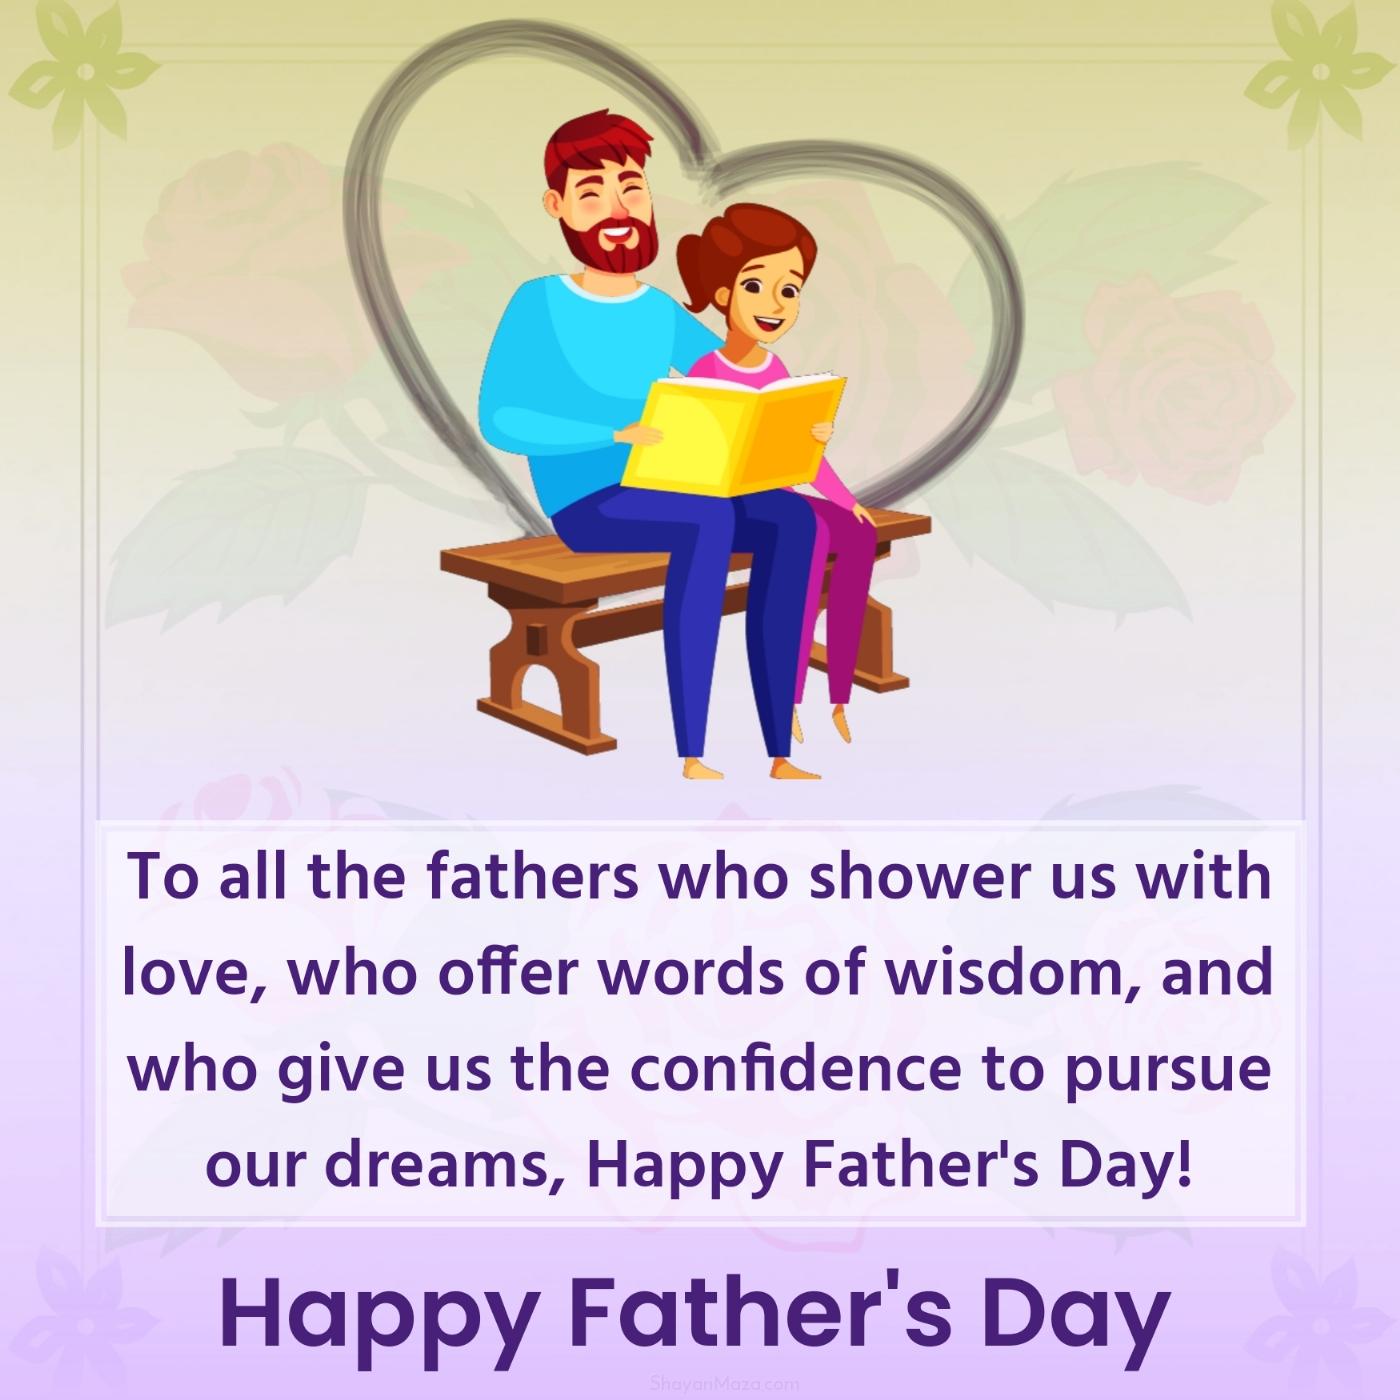 To all the fathers who shower us with love who offer words of wisdom